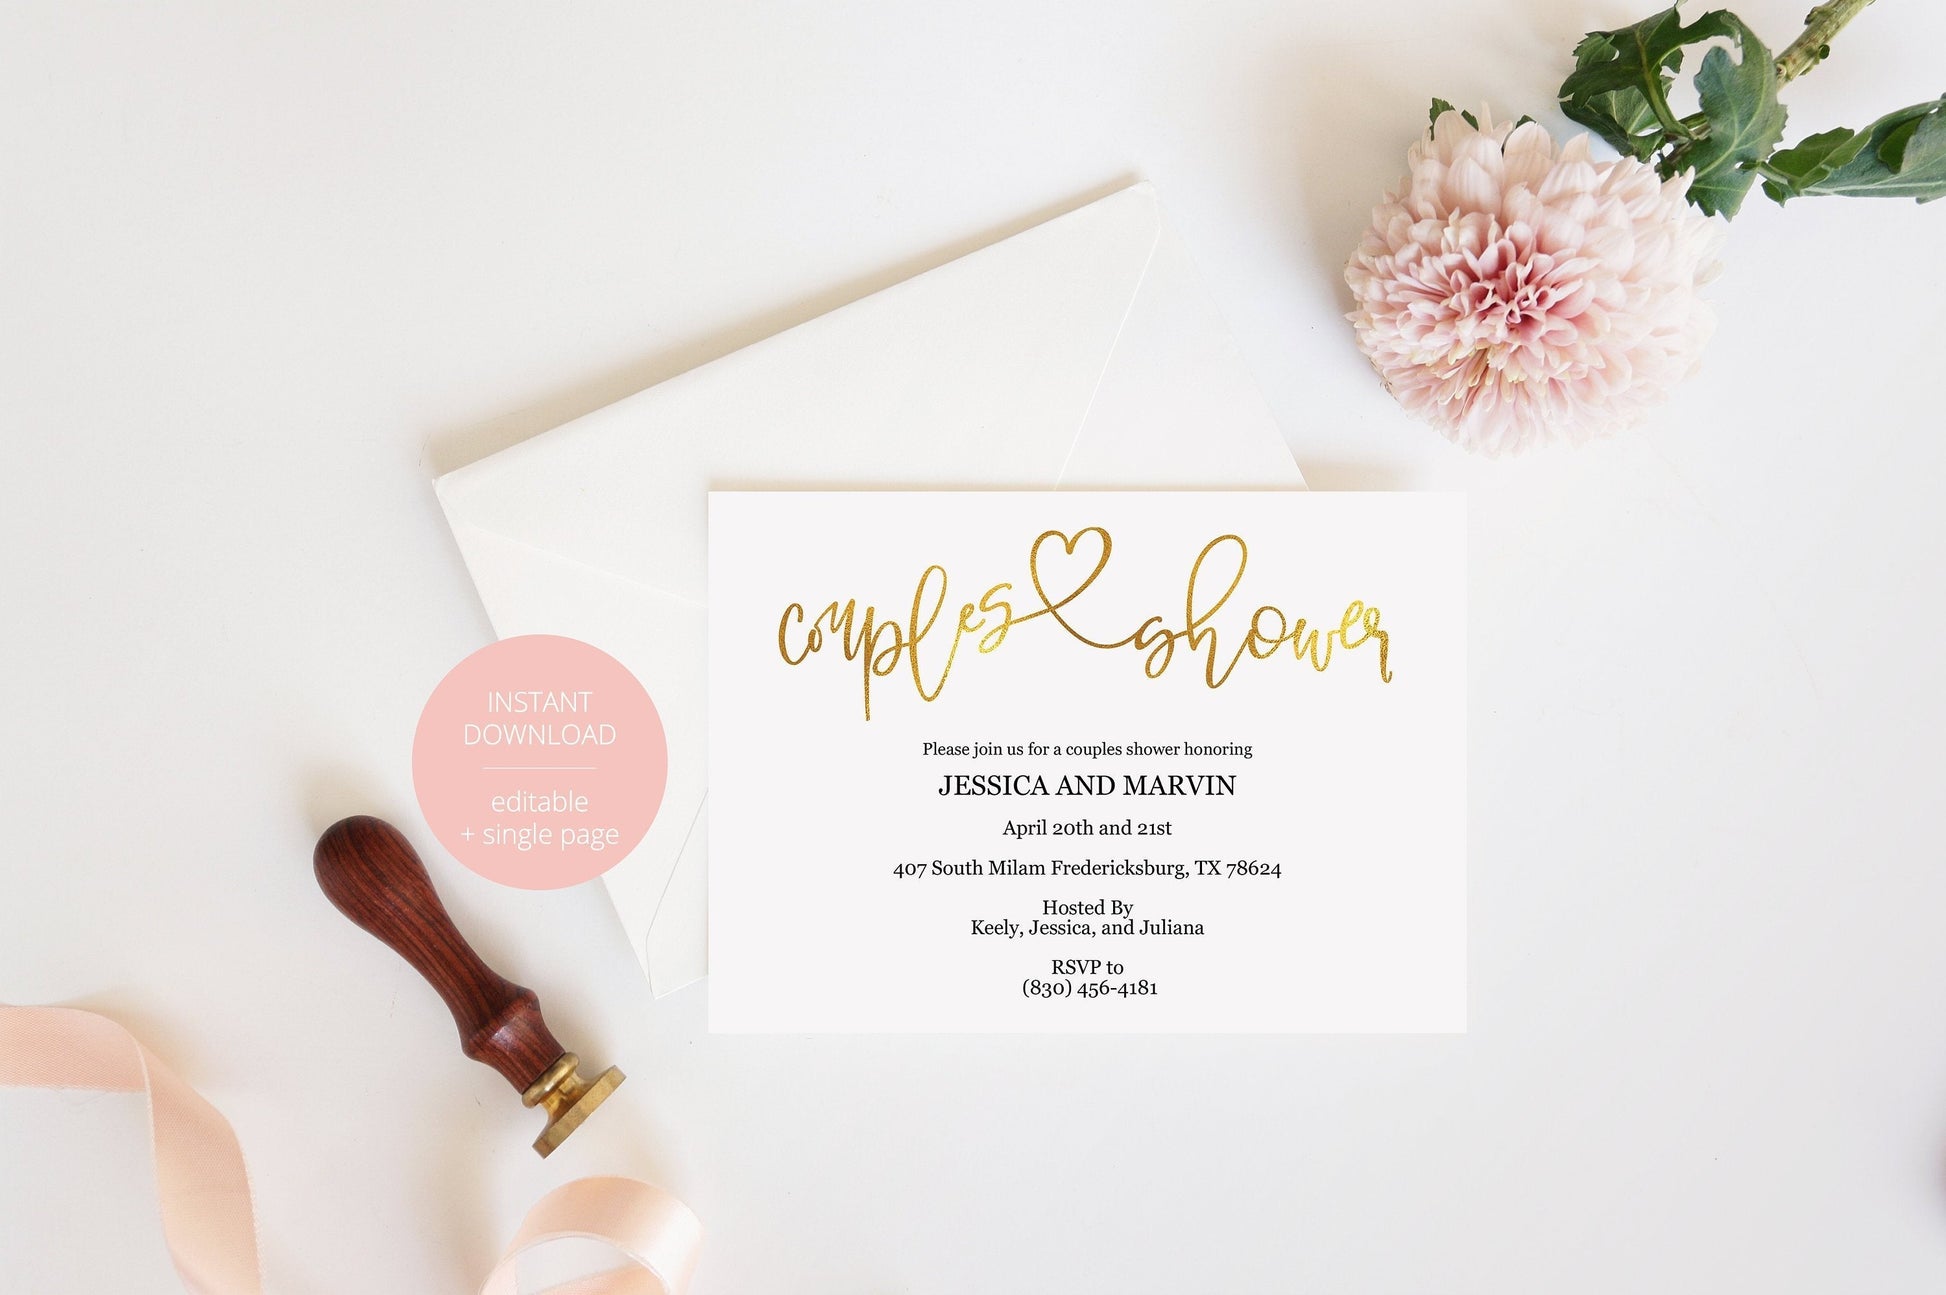 Gold Couples Shower Invitation Instant Download Printable Editable Template DIY Bridal Shower Invite -JESSICA SHOWERS | BACHELORETTE SAVVY PAPER CO